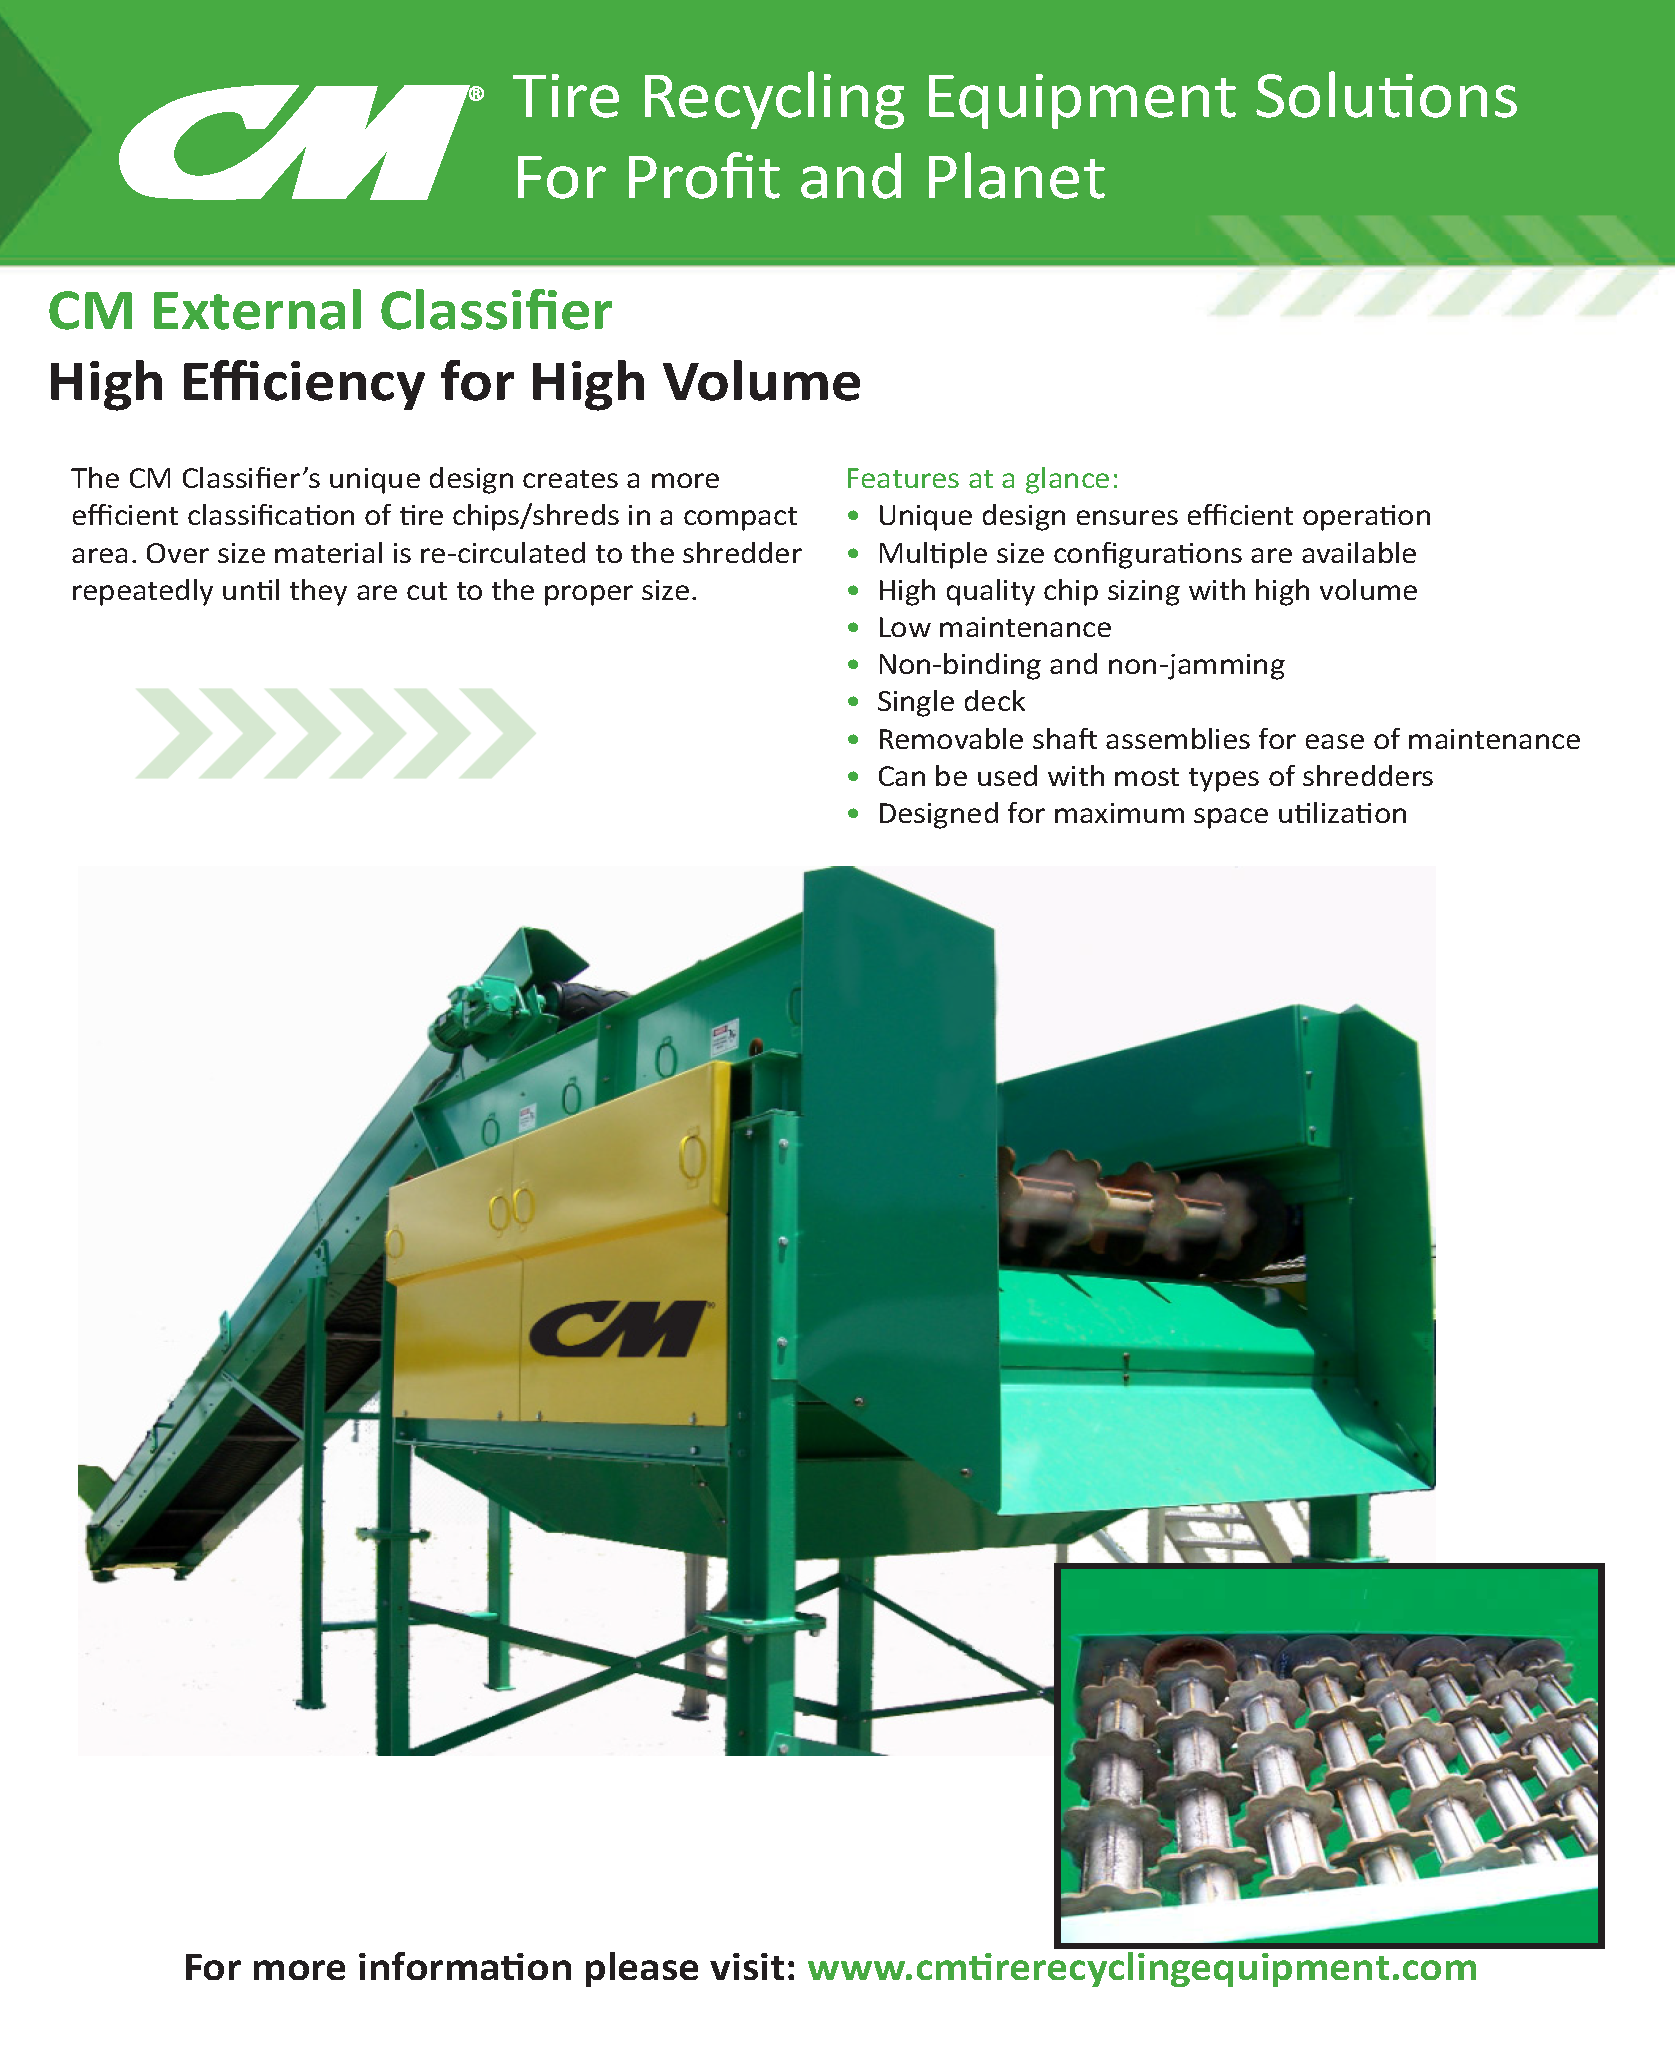 Learn more by viewing the CM External Classifier Brochure